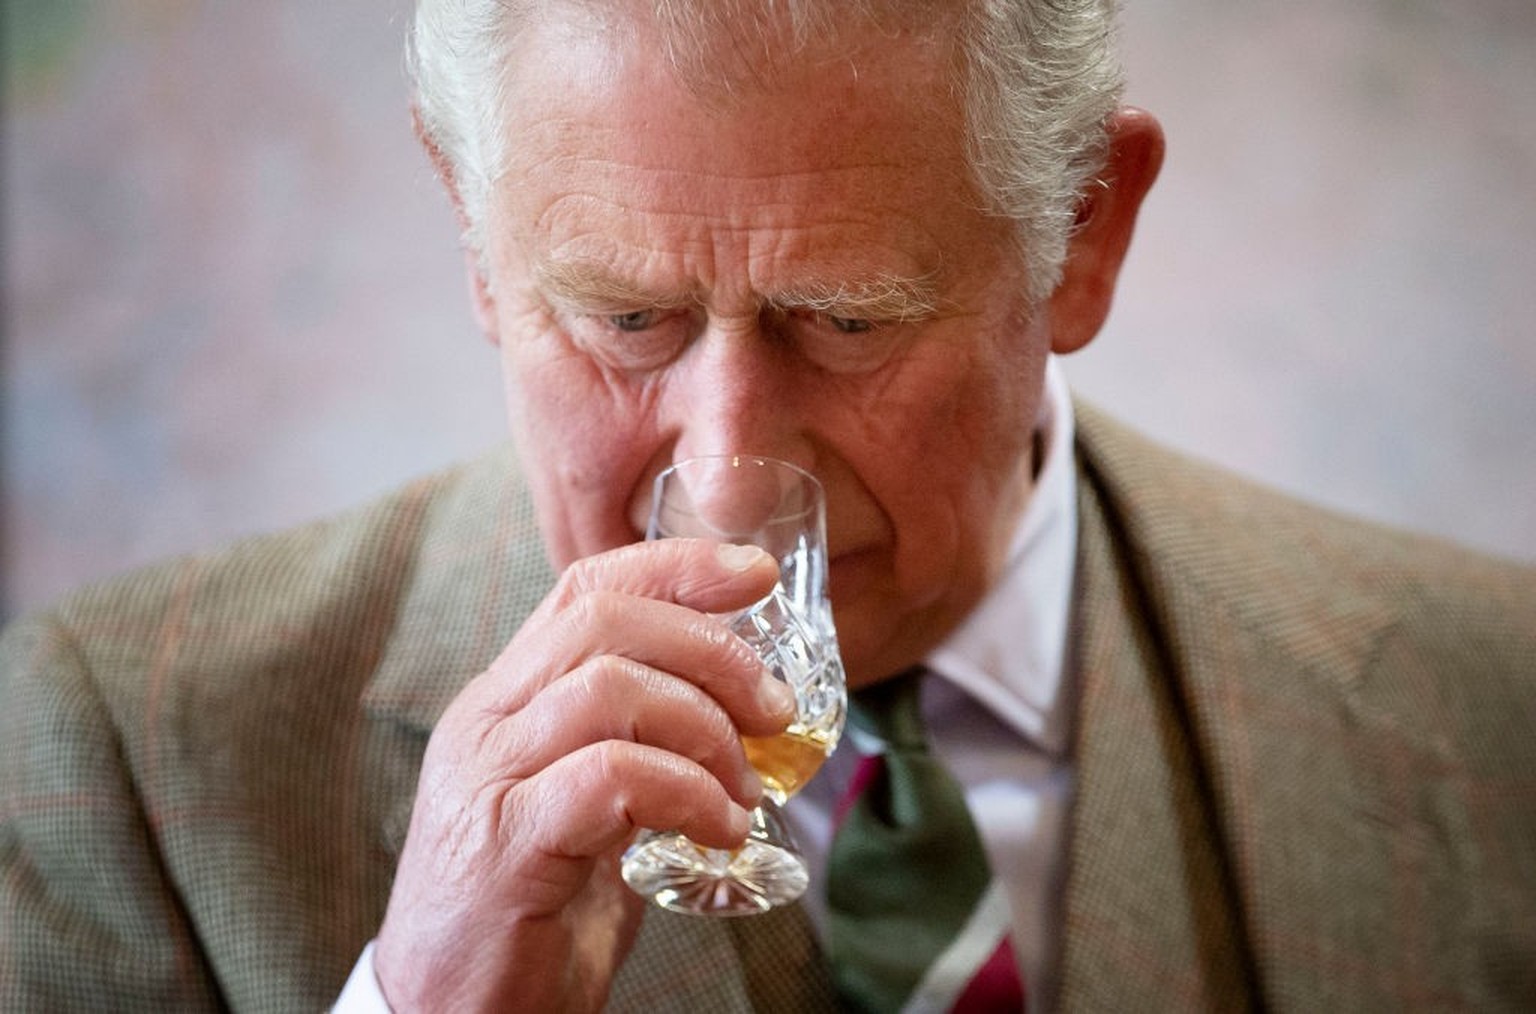 The Prince of Wales, known as the Duke of Rothesay while in Scotland, takes part in a whisky tasting during a visit to the Royal Lochnagar Distillery at Crathie on Royal Deeside. (Photo by Jane Barlow ...